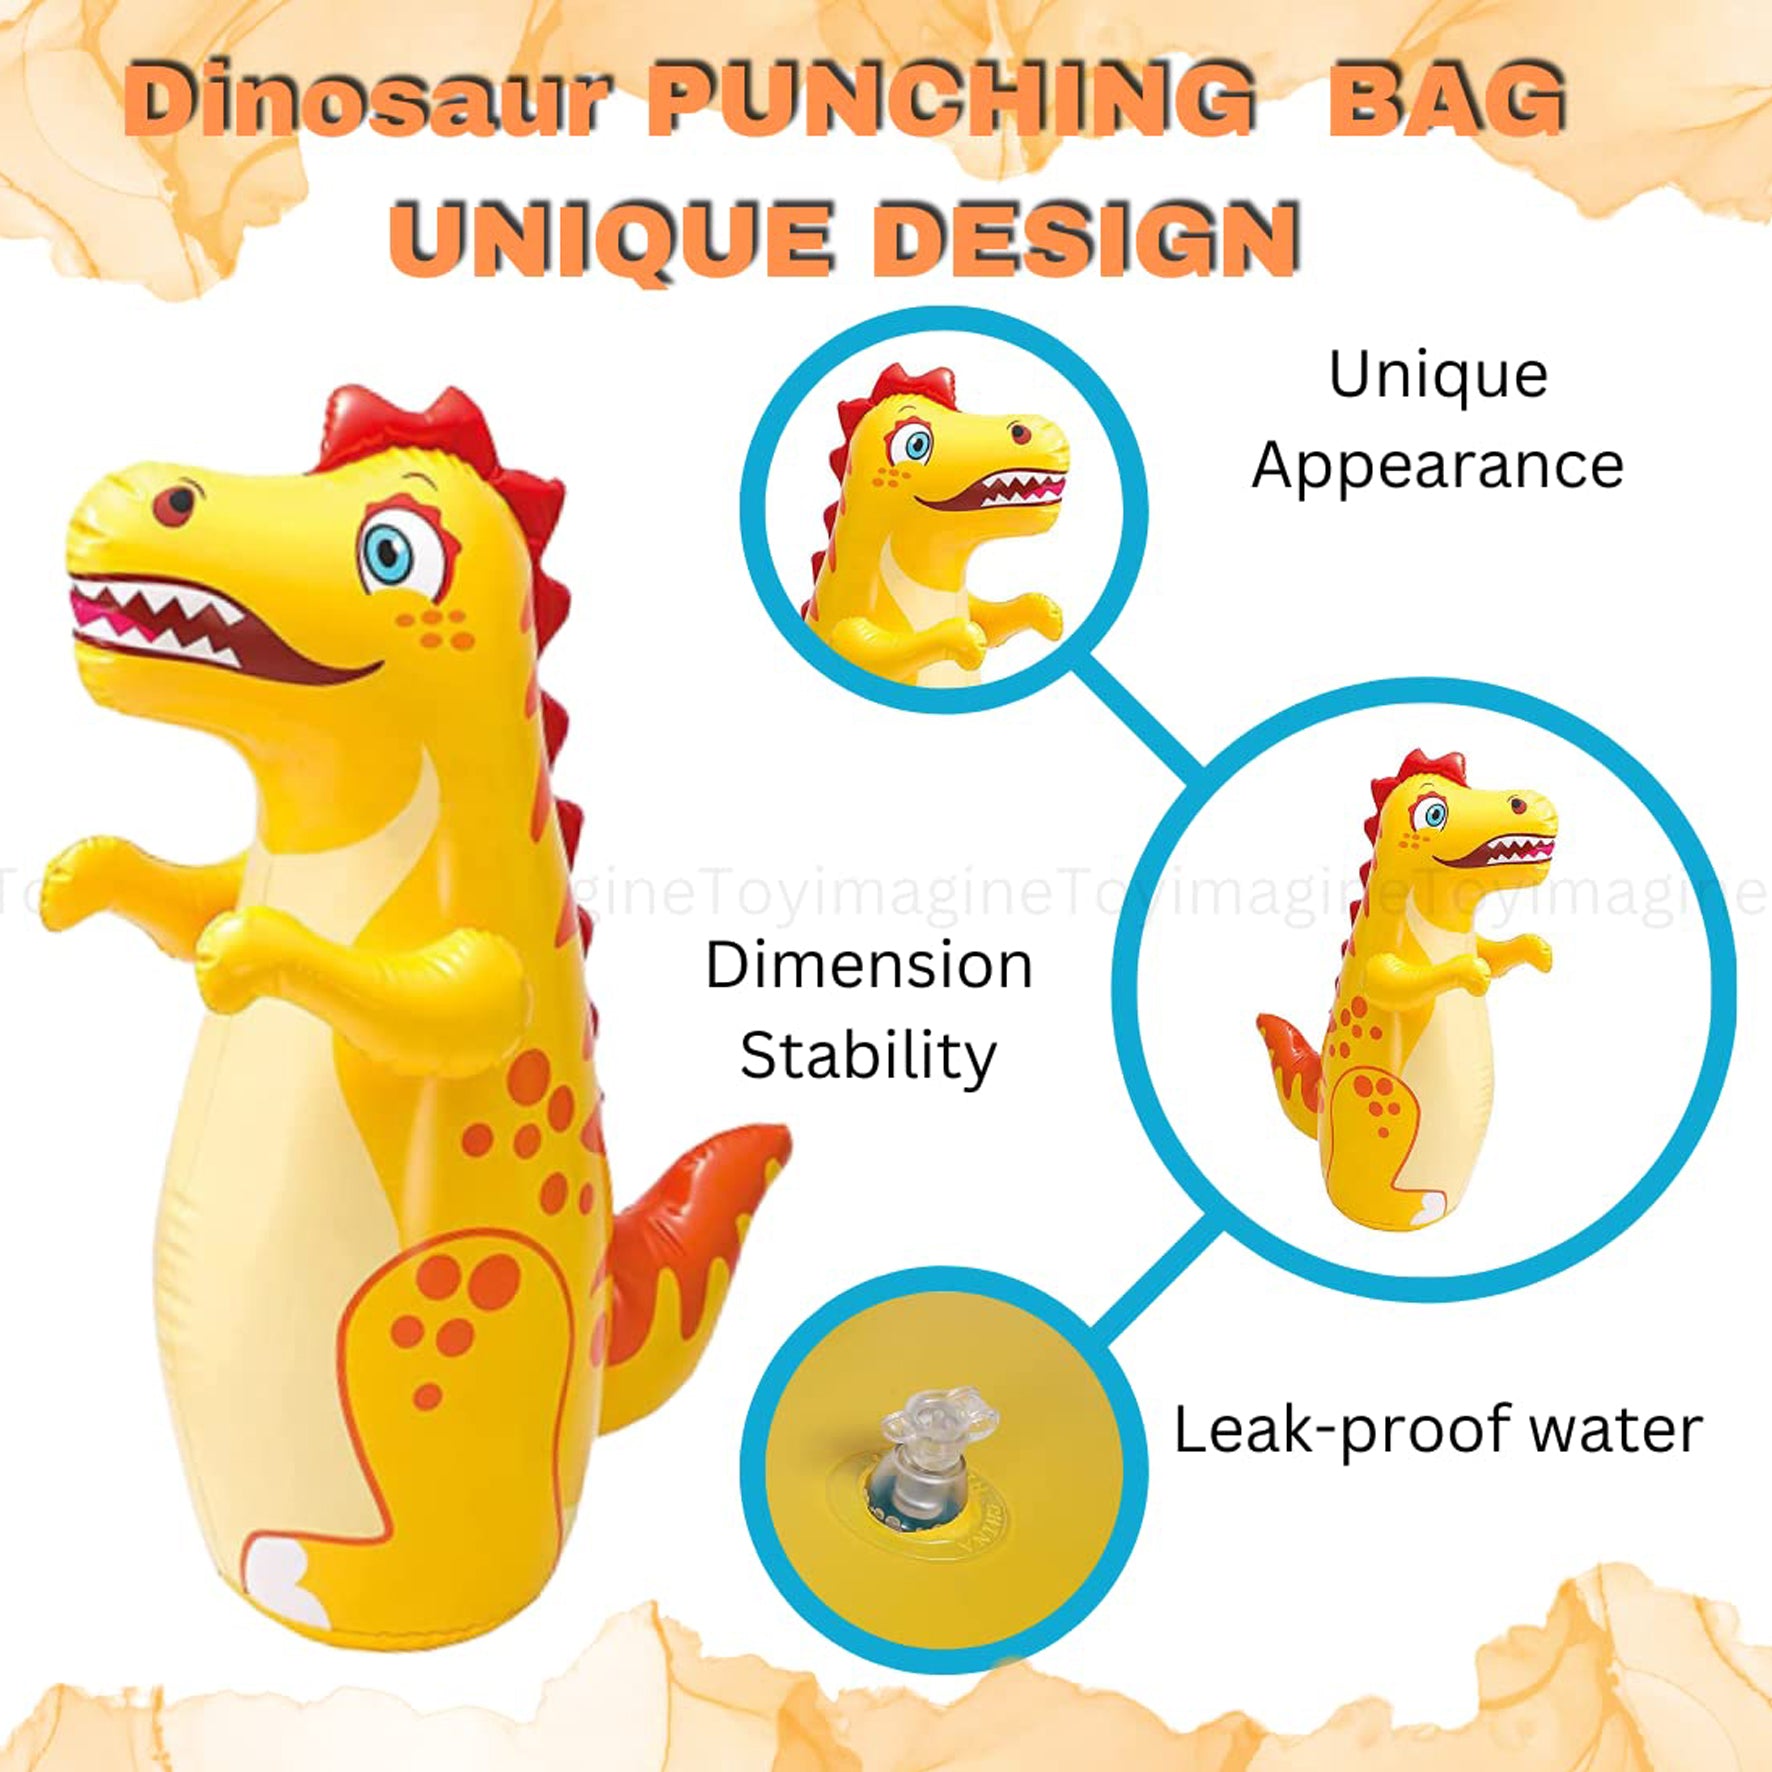 Dragon Hit Me Toy 3-D Inflatable Animal Toy | Water Base and Air Base for Toddlers | PVC Punching Bag for Kids | Activity Toy for Kids Age 3 +.